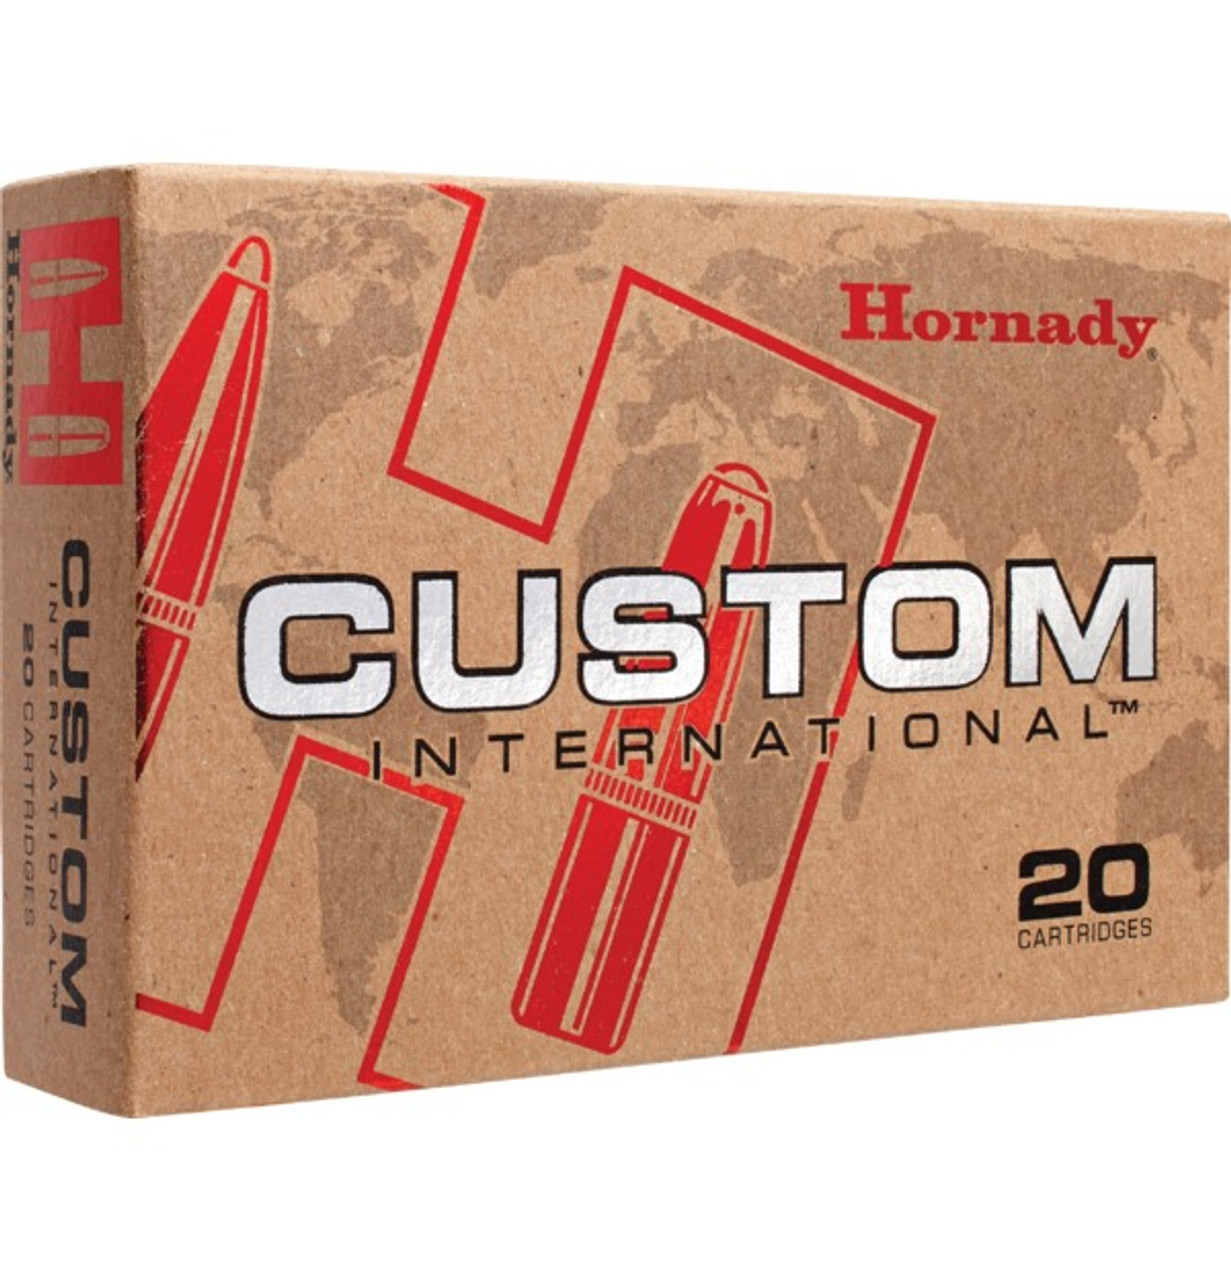 Cut Away
Product Features
Make your hunting experience a tradition you can count on, with Custom International™ ammunition!
HORNADY® BULLETS
Available in a wide variety of hunting calibers, Custom International™ ammunition is loaded with InterLock®, GMX®, or ETX® bullets, providing an all-around line of hunting ammunition for your preferred shooting experience.

EXPANSION AND PENETRATION
An industry leader and customer favorite, Custom International™ ammunition balances expansion and penetration and is well-suited to medium and large sized game.

BALLISTIC EFFICIENCY
Most Custom International™ loads feature bullets with a secant ogive design. This pioneering profile, developed by Hornady,® creates the optimum blend of ballistic efficiency and bearing surface for flatter shooting and less drag.

TEST BARREL (24cm)
MUZZLE
50 METERS
100 METERS
150 METERS
200 METERS
250 METERS
300 METERS
VELOCITY
(M/SEC)
ENERGY
(JOULES)
TRAJECTORY
(CM)
792
3663
-5
758
3353
-0.4
725
3062
0
692
2791
-4.3
660
2539
-13.7
628
2304
-28.8
598
2085
-50.1